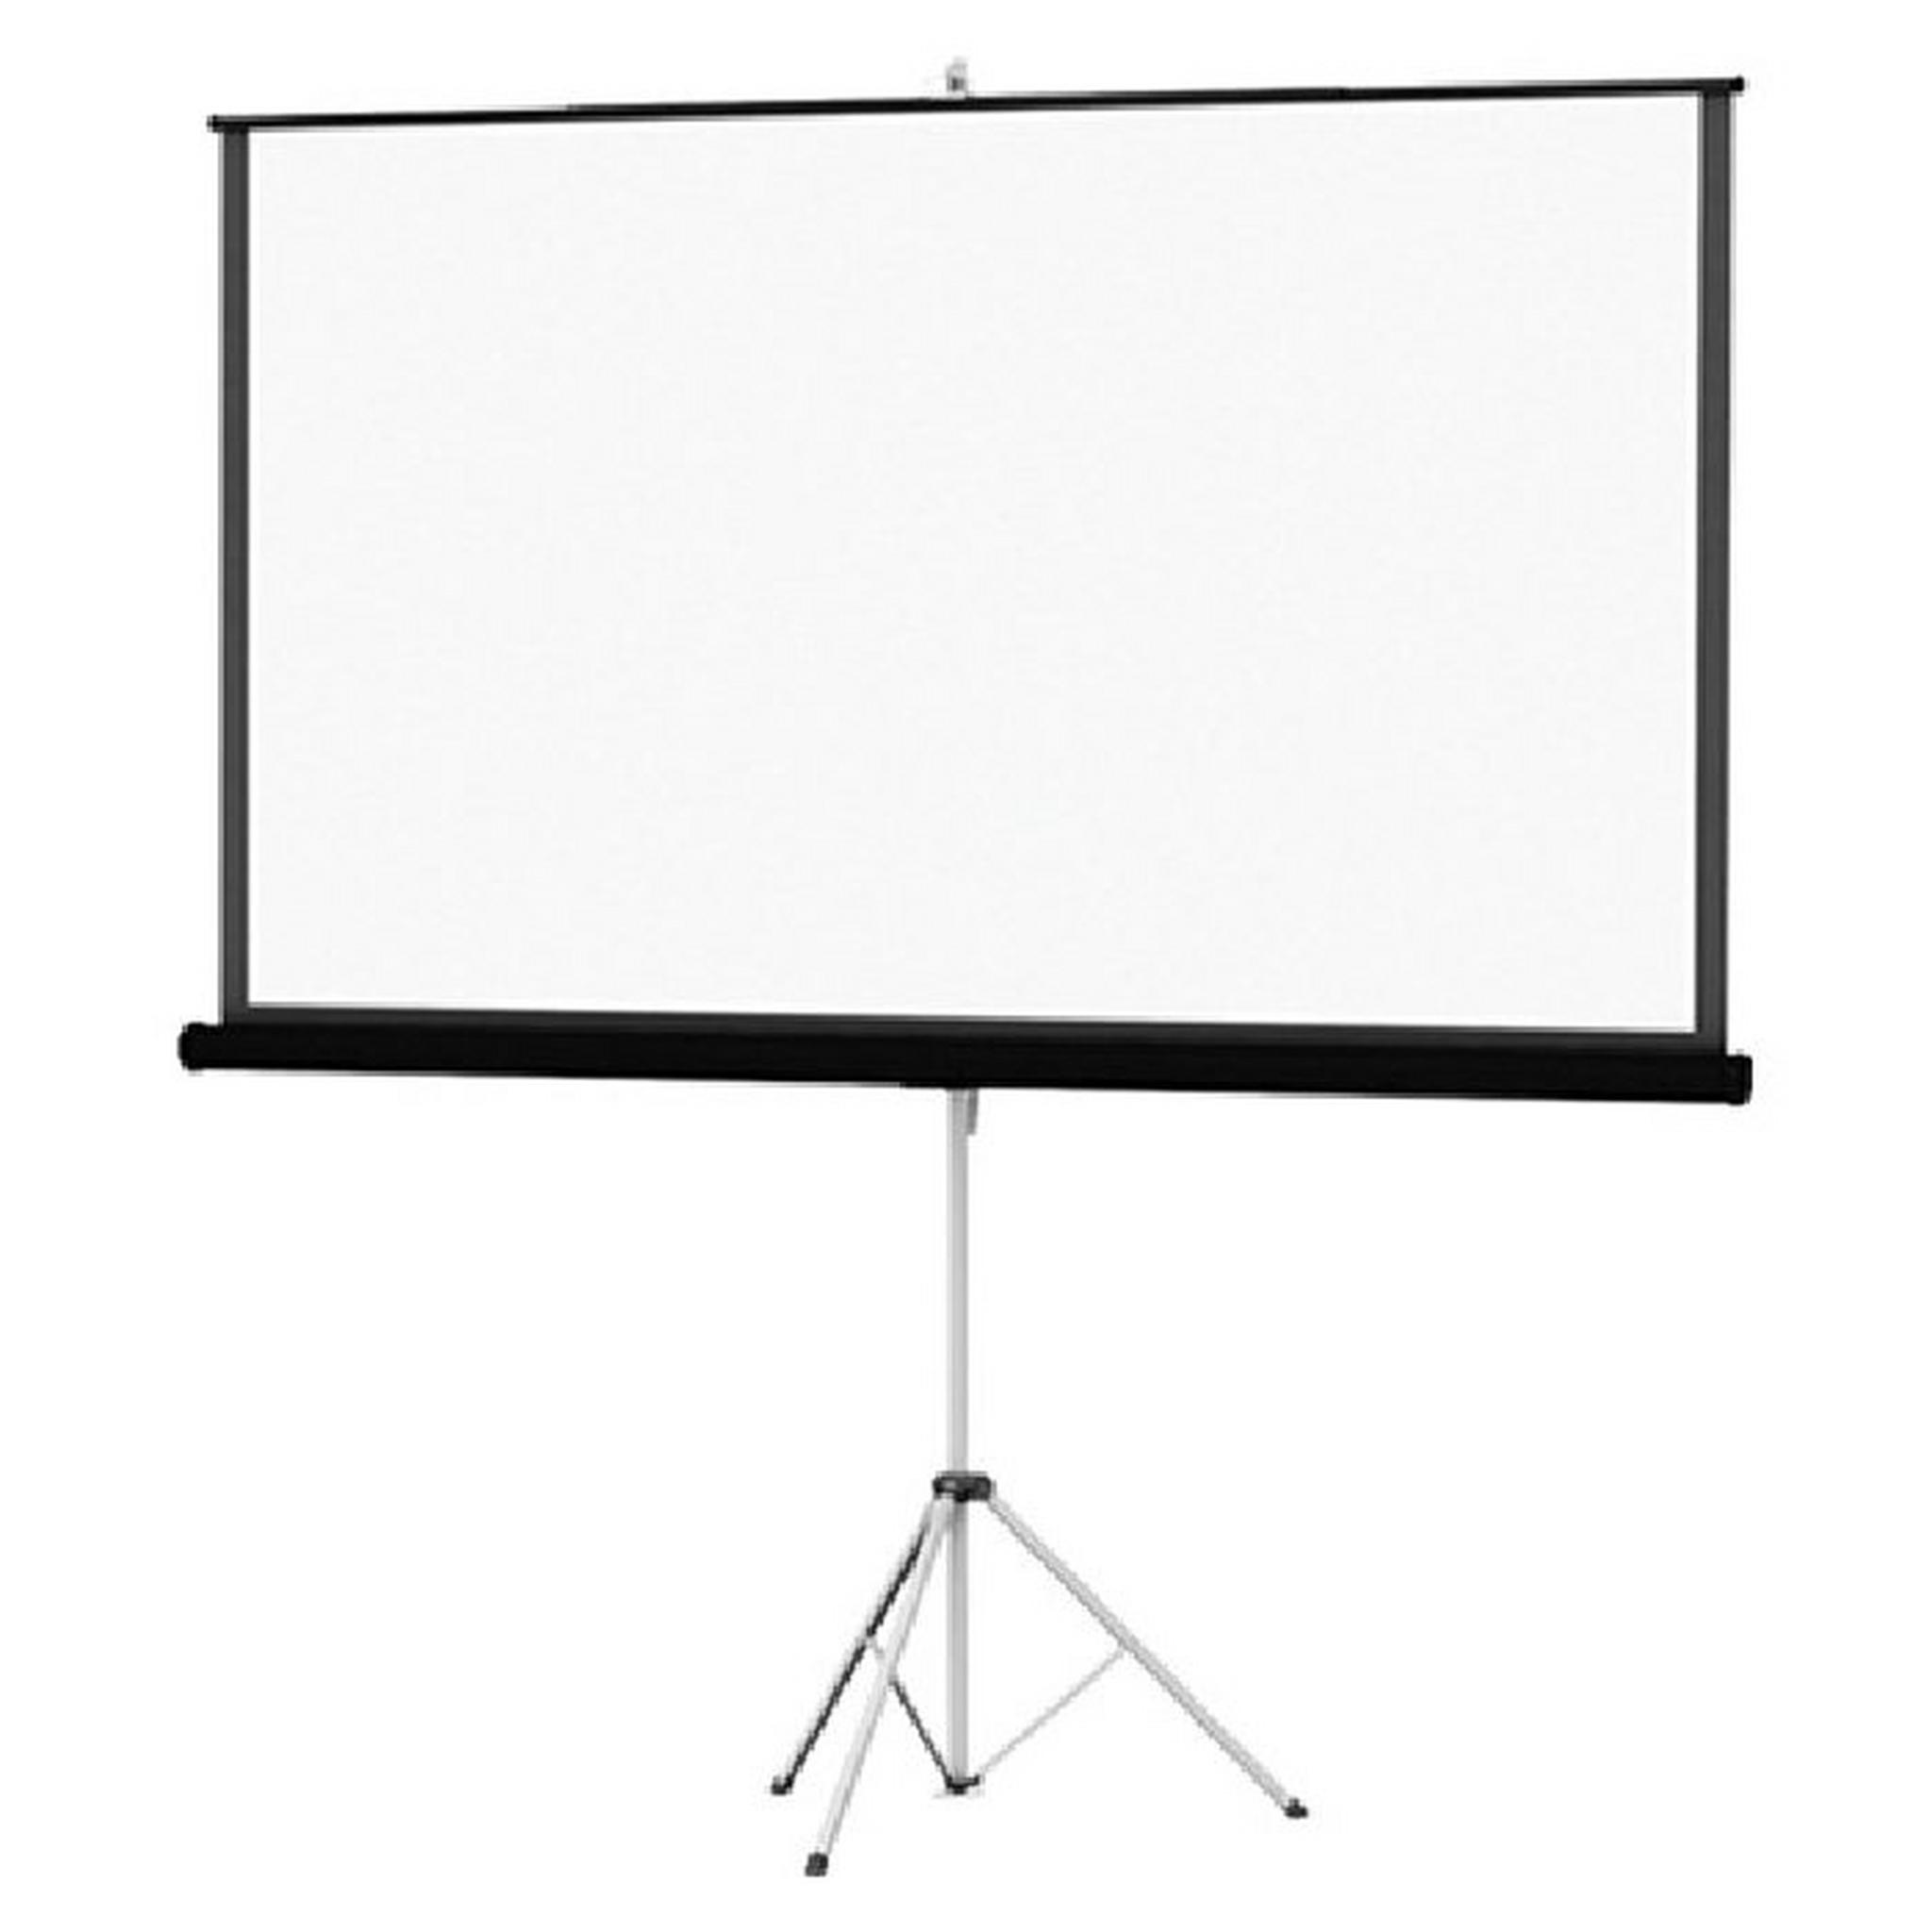 DL Projection Screen, 100inch, 2.03M x 1.52M